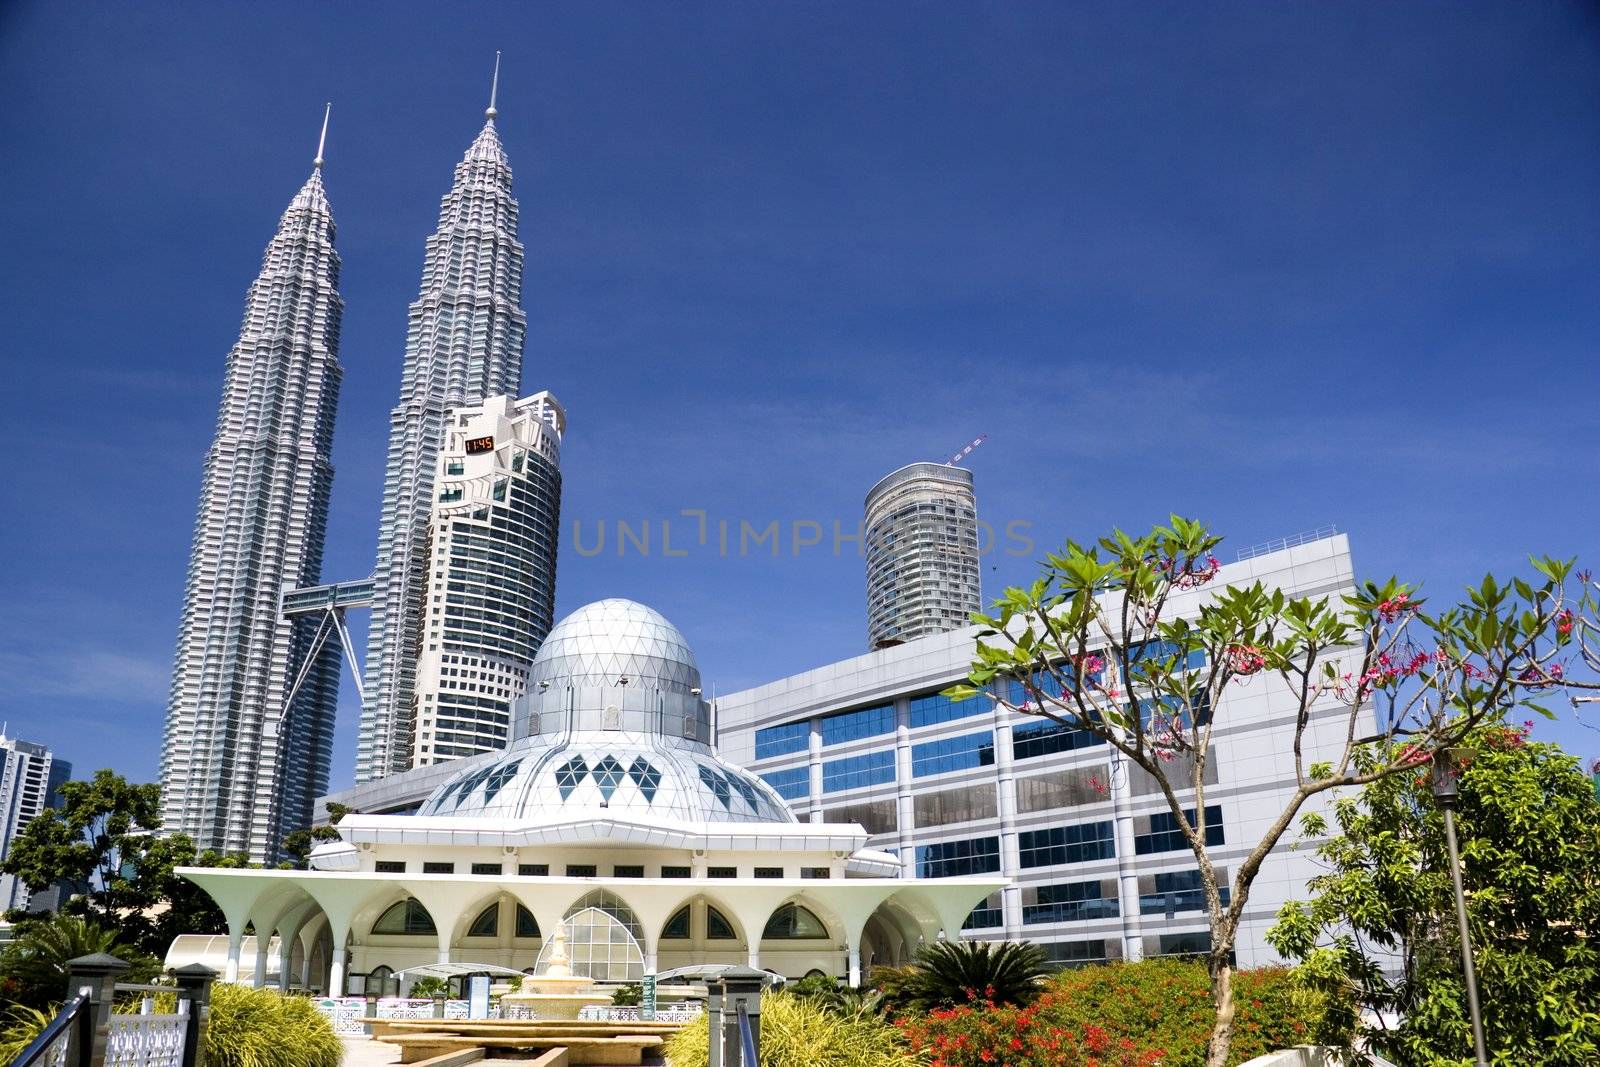 KLCC Mosque by shariffc